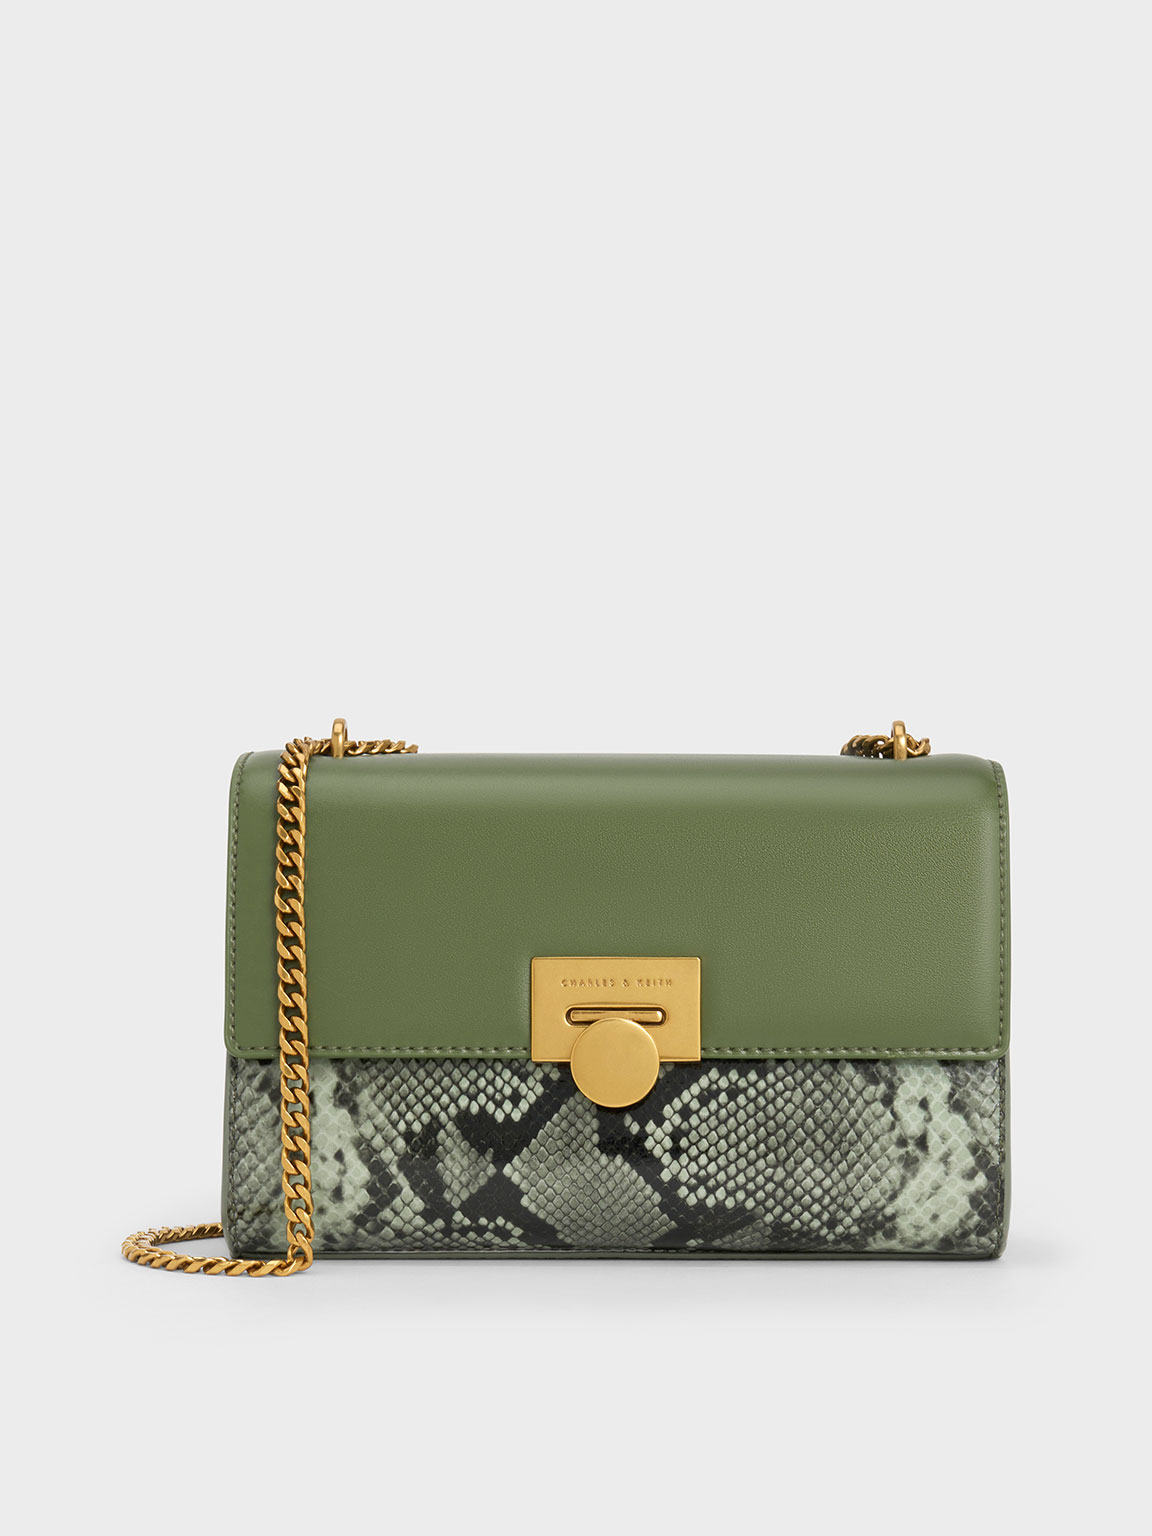 Buy Diva Dale Snake Pattern Green Wide Metal Chain Shoulder Bag For Women  at Amazon.in